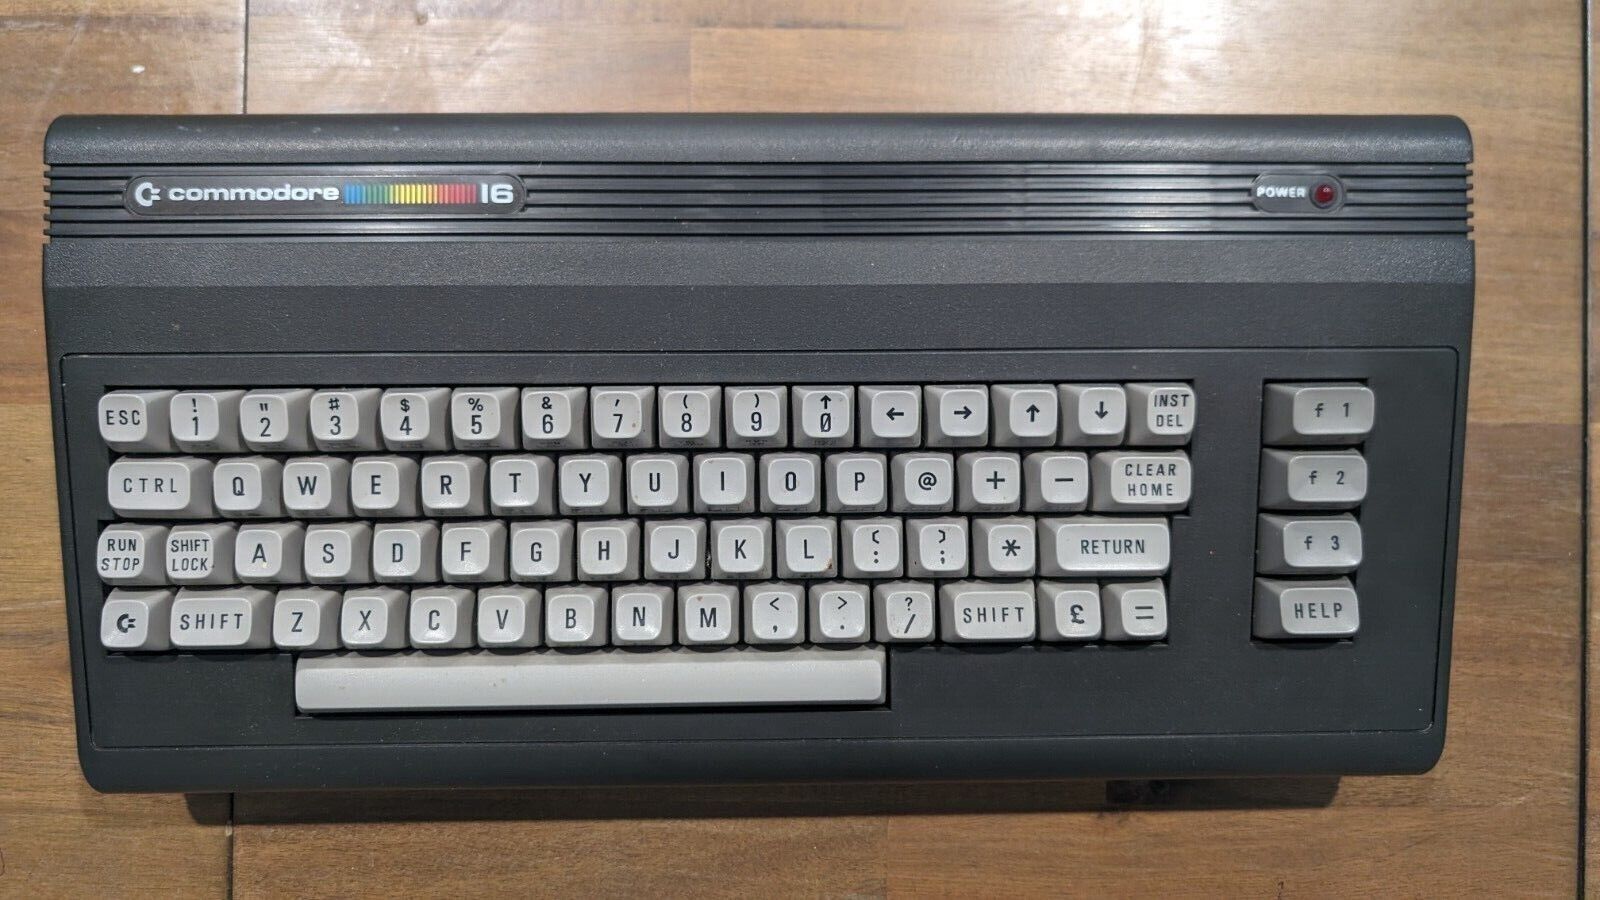 Commodore 16 C16 64k Ram Home Computer Keyboard NOT TESTED no power cords